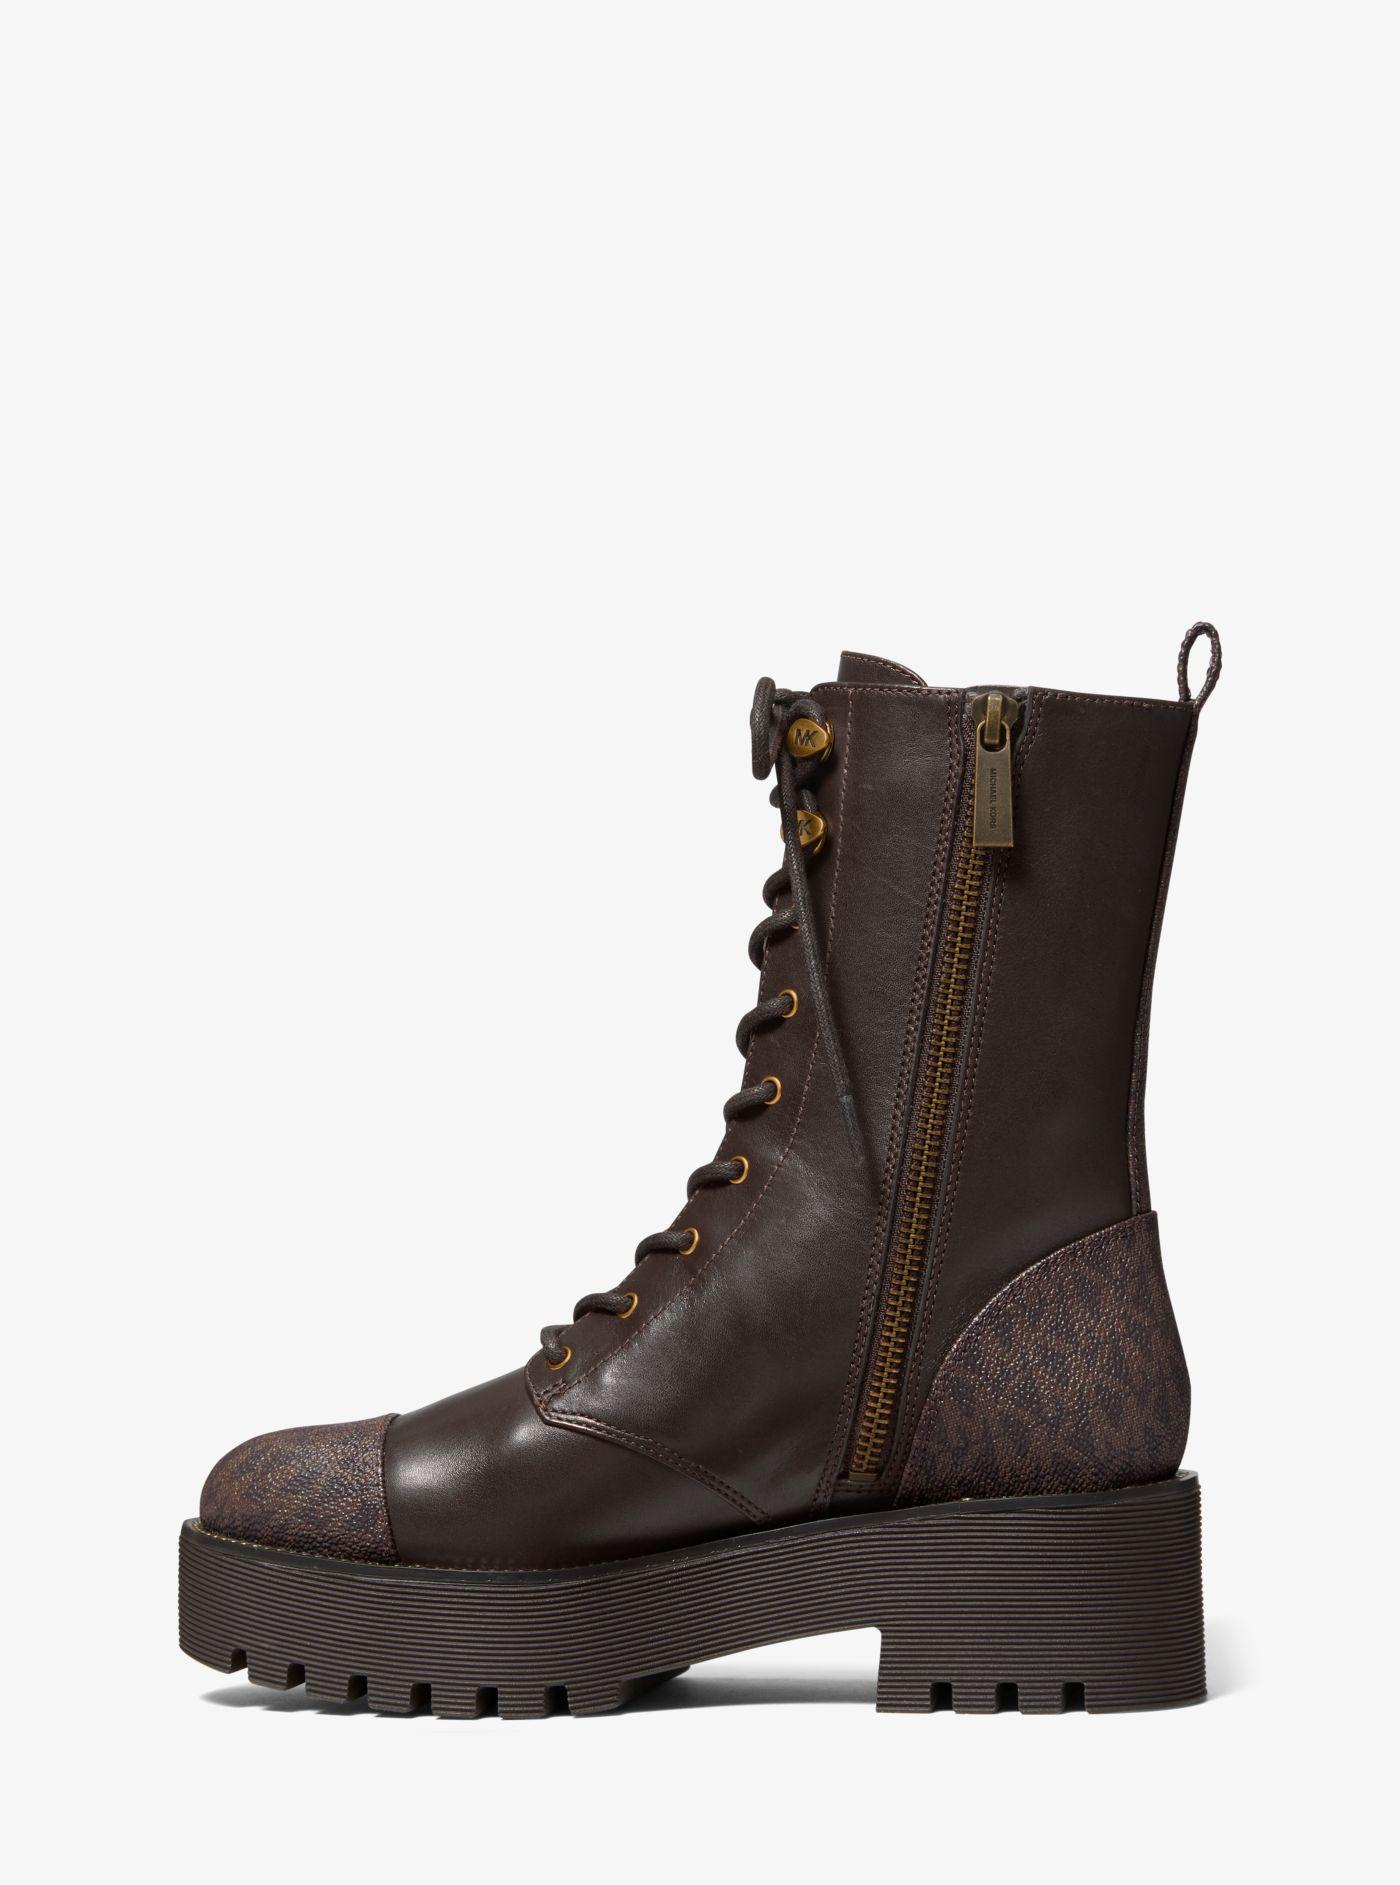 Michael Kors Bryce Leather And Logo Platform Combat Boot in Brown | Lyst